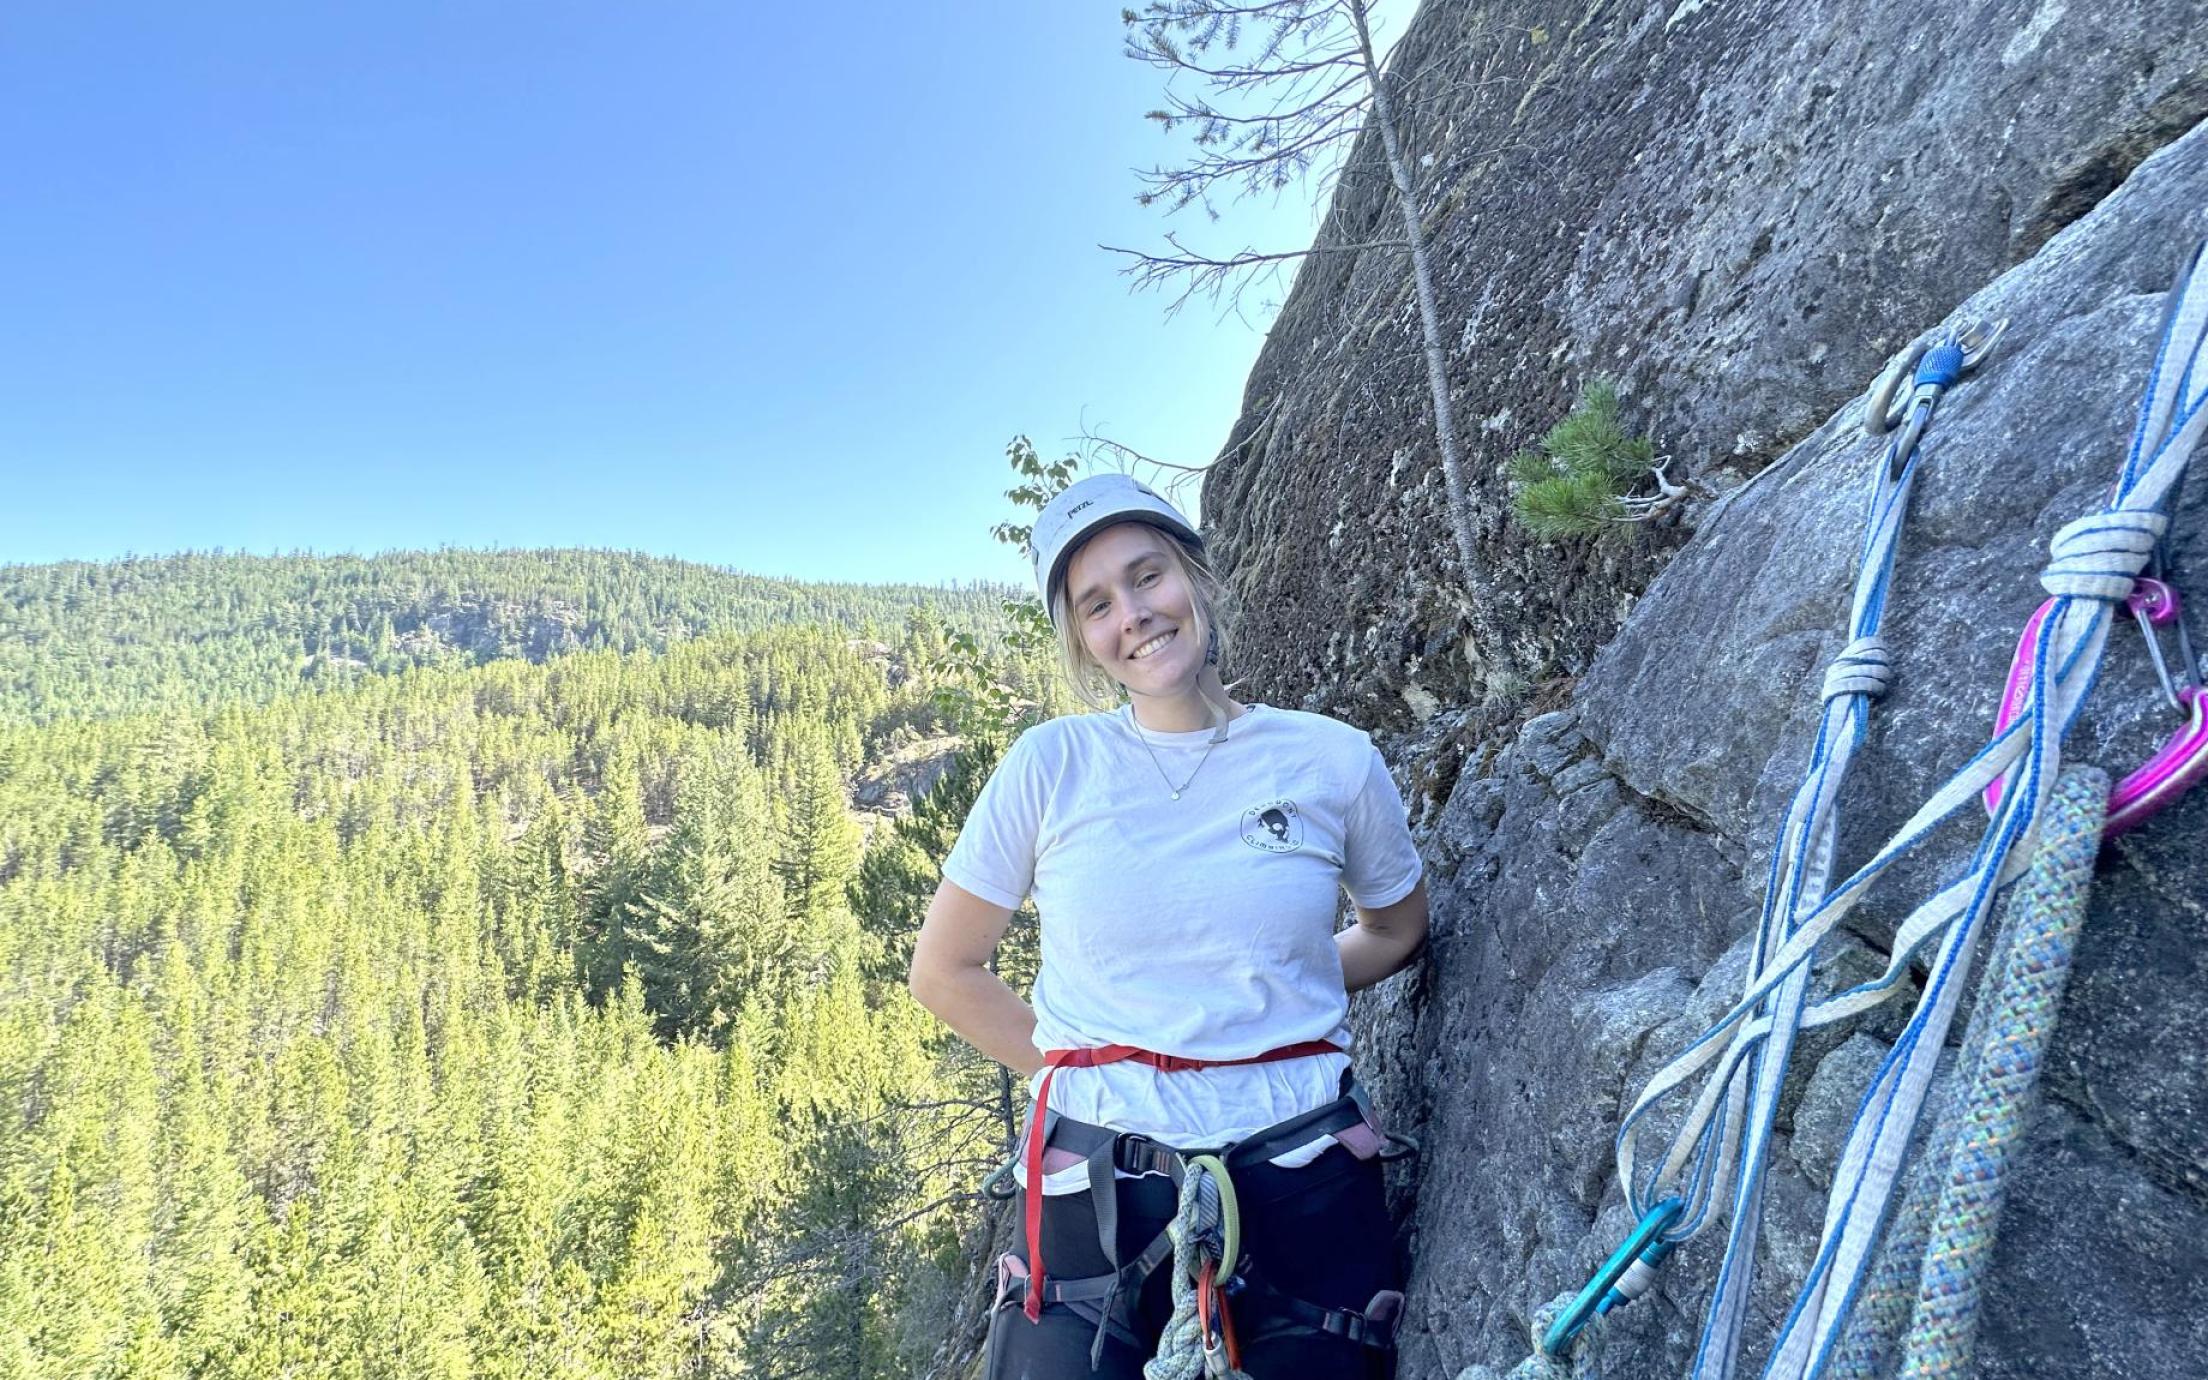 Sydney Solland stands on a ledge next to a rock face with climbing gear in front of her